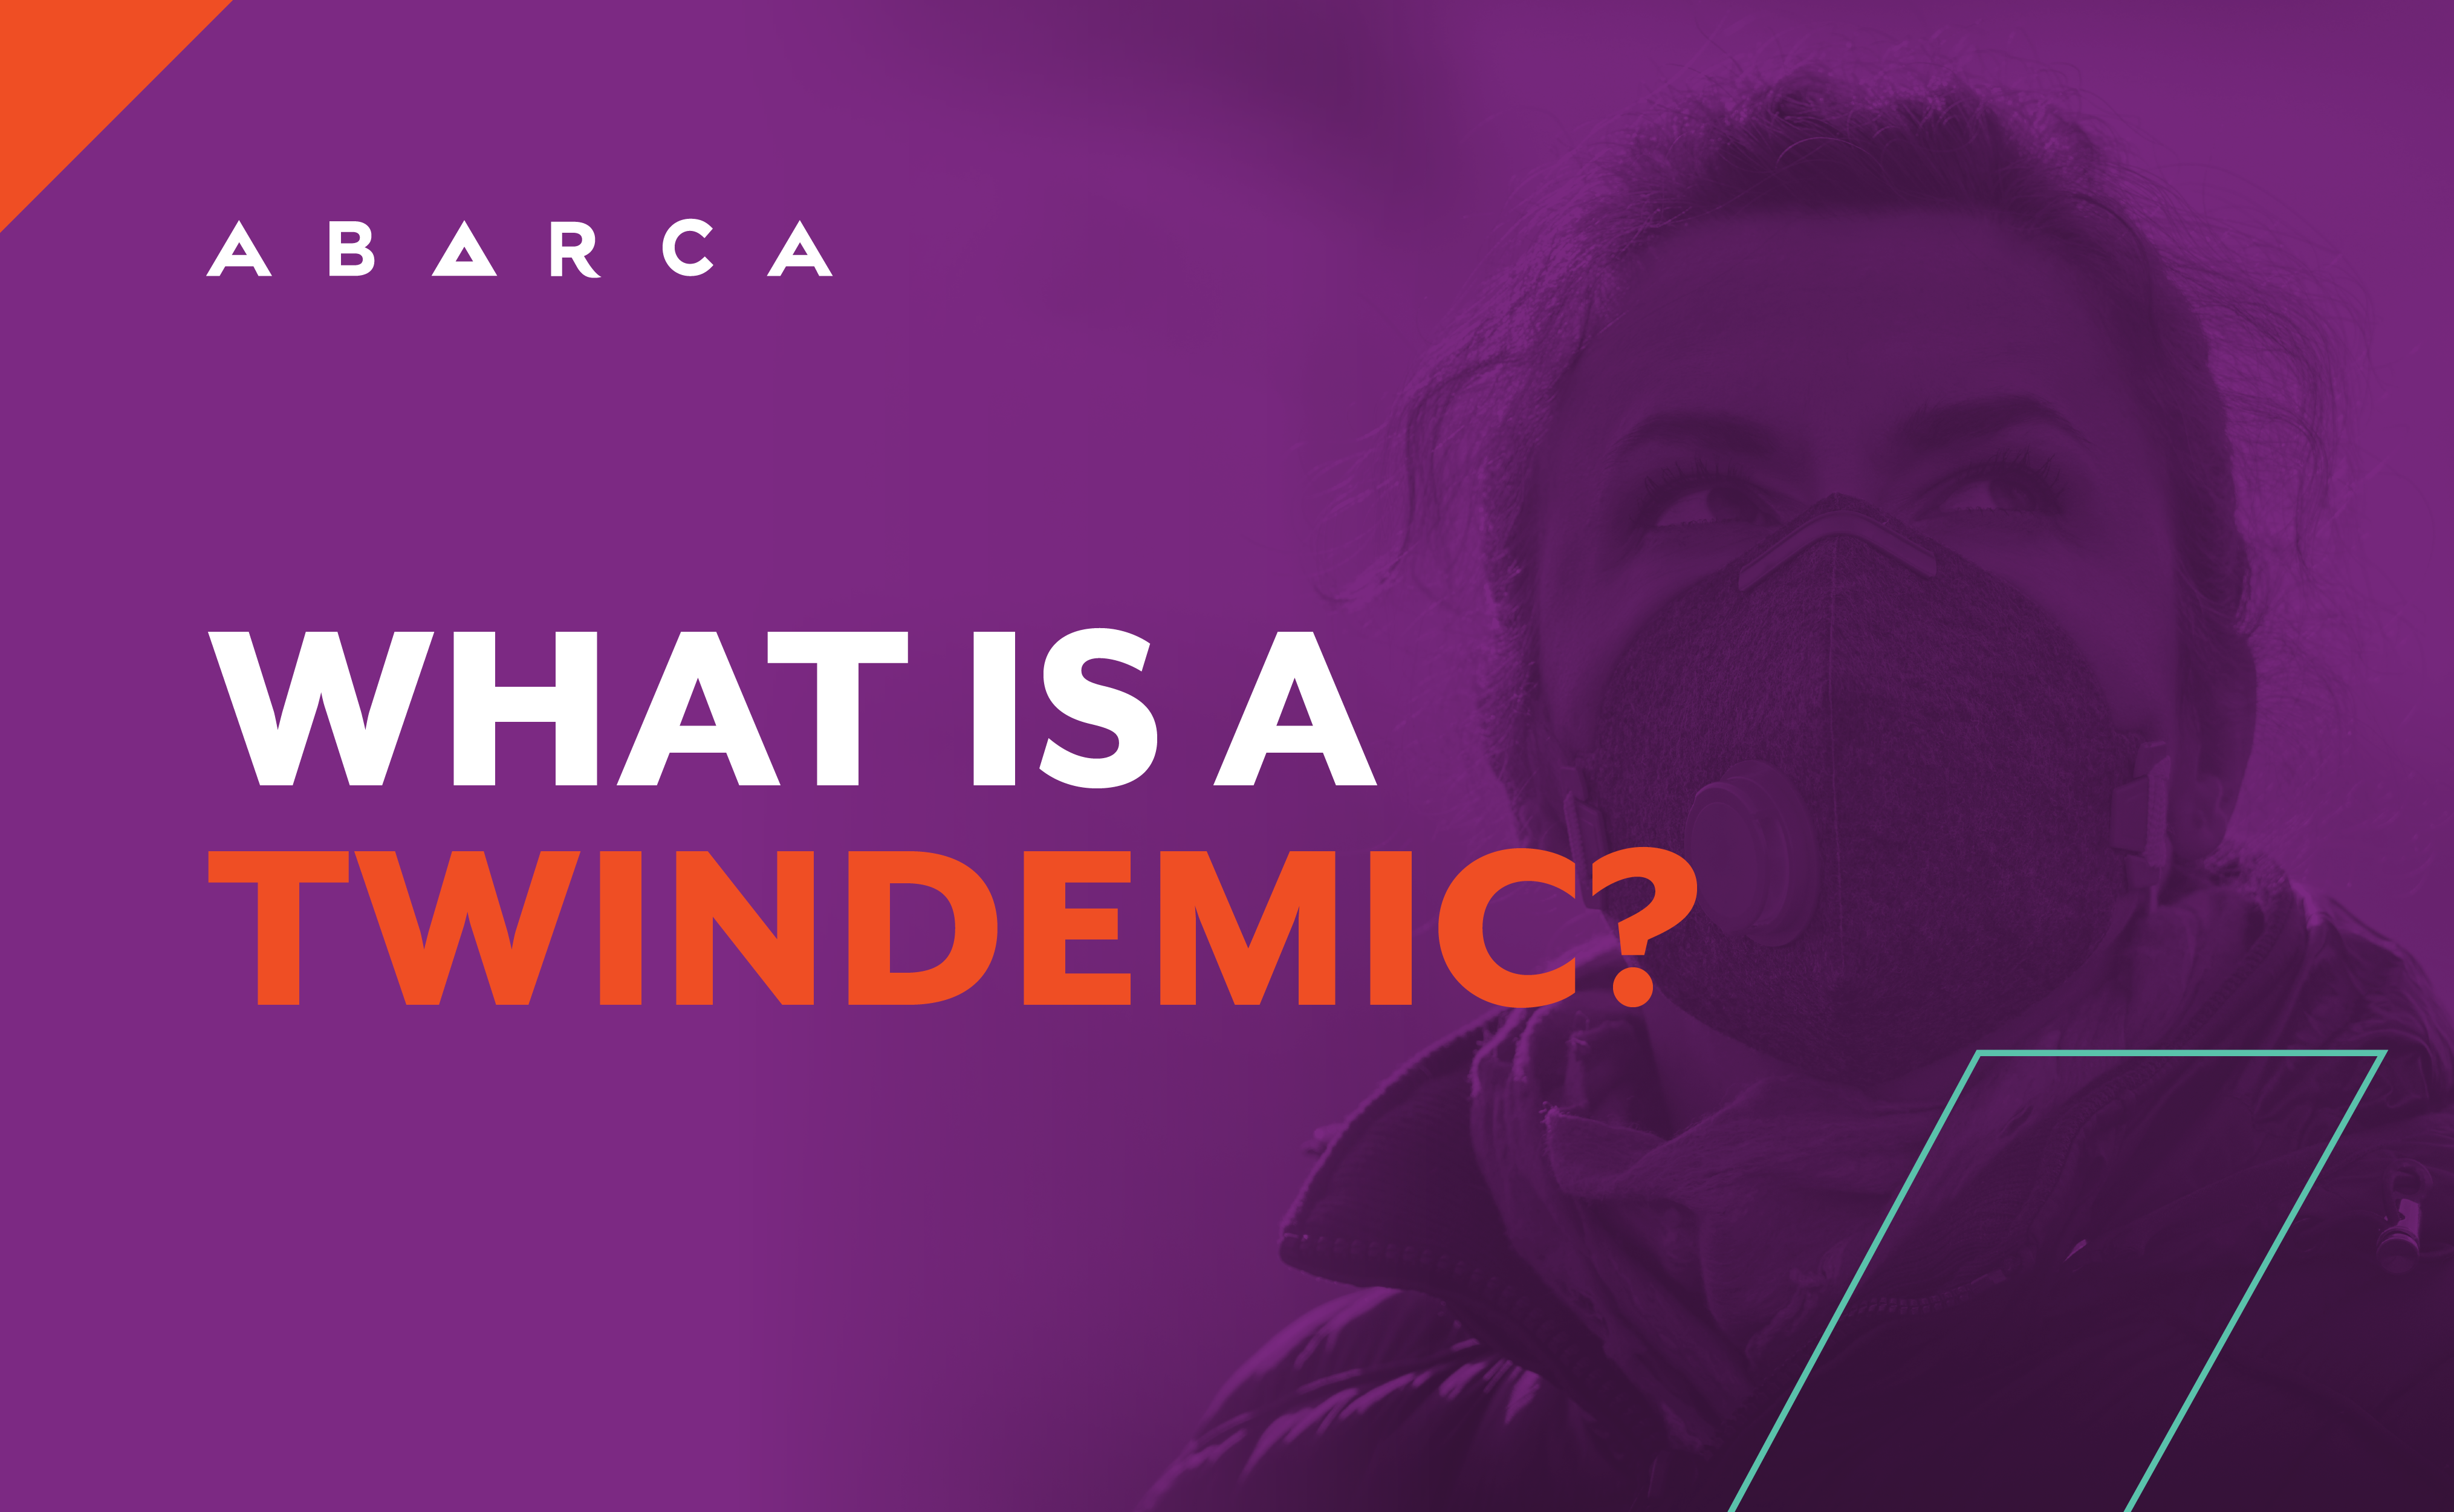 Abarca Health: What is a twindemic?